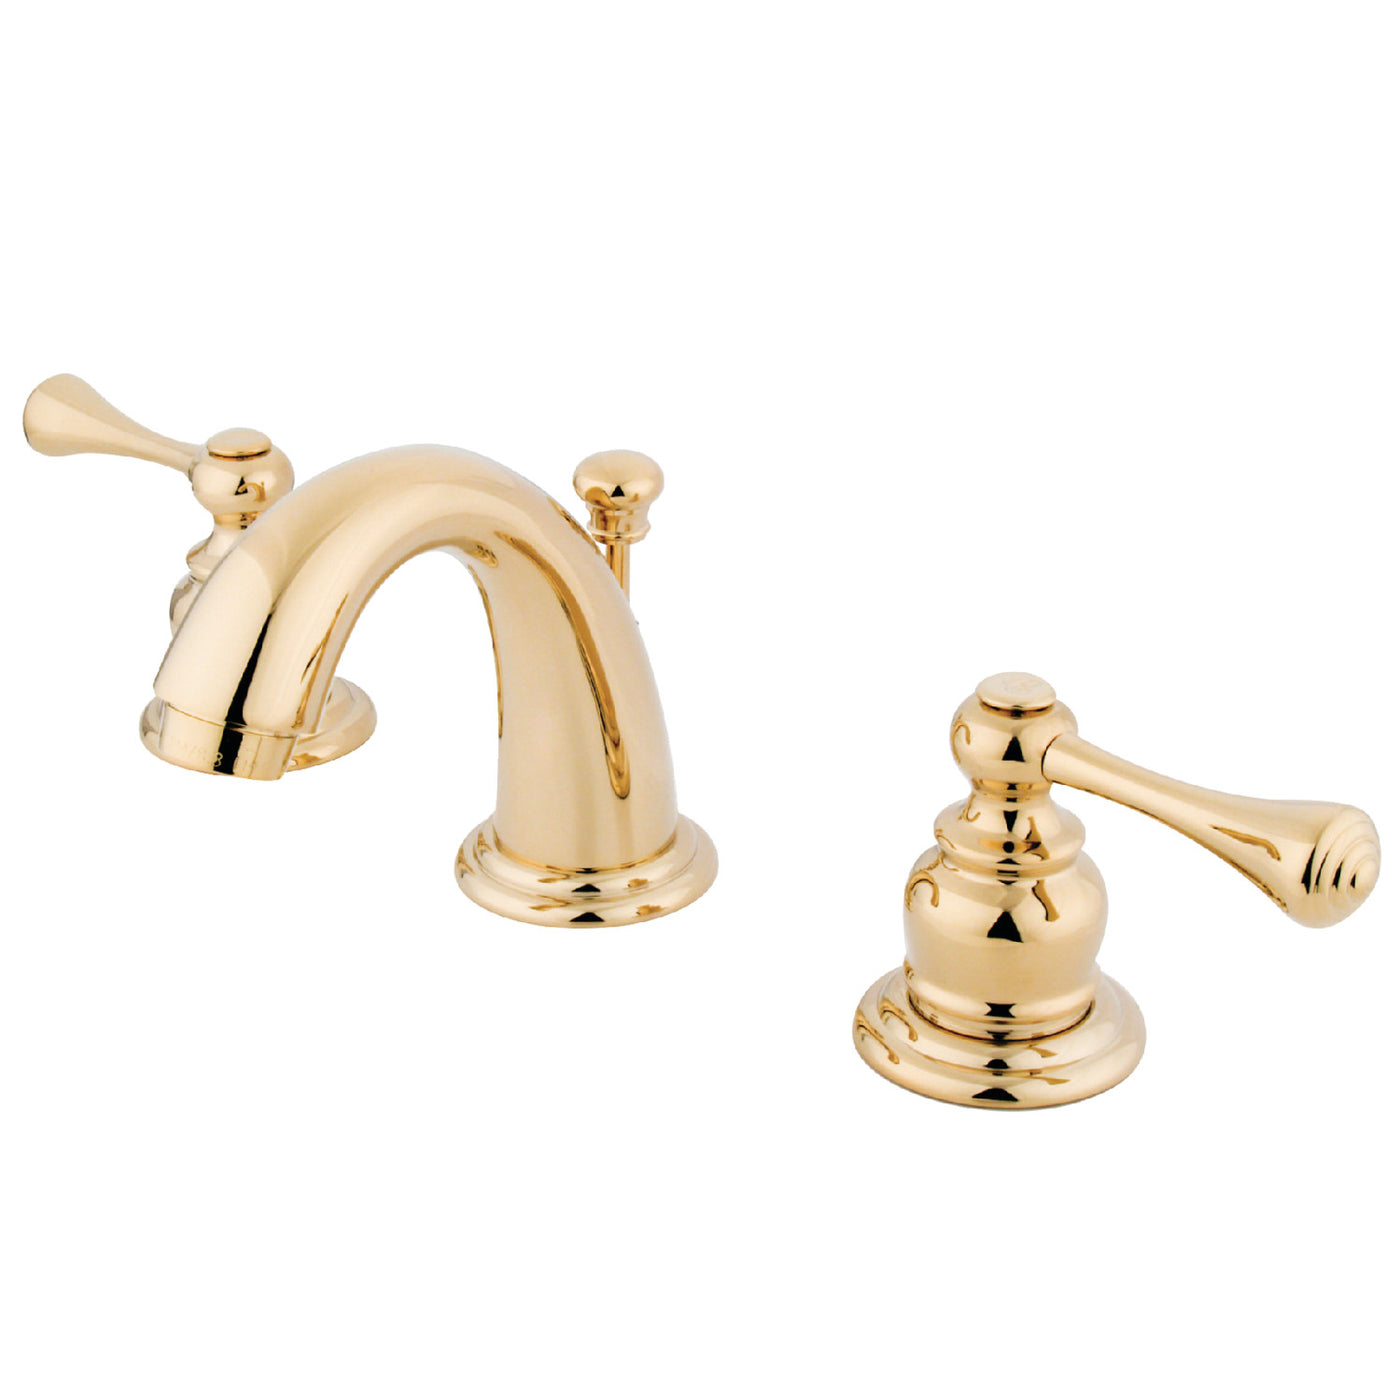 Elements of Design EB912BL Widespread Bathroom Faucet, Polished Brass